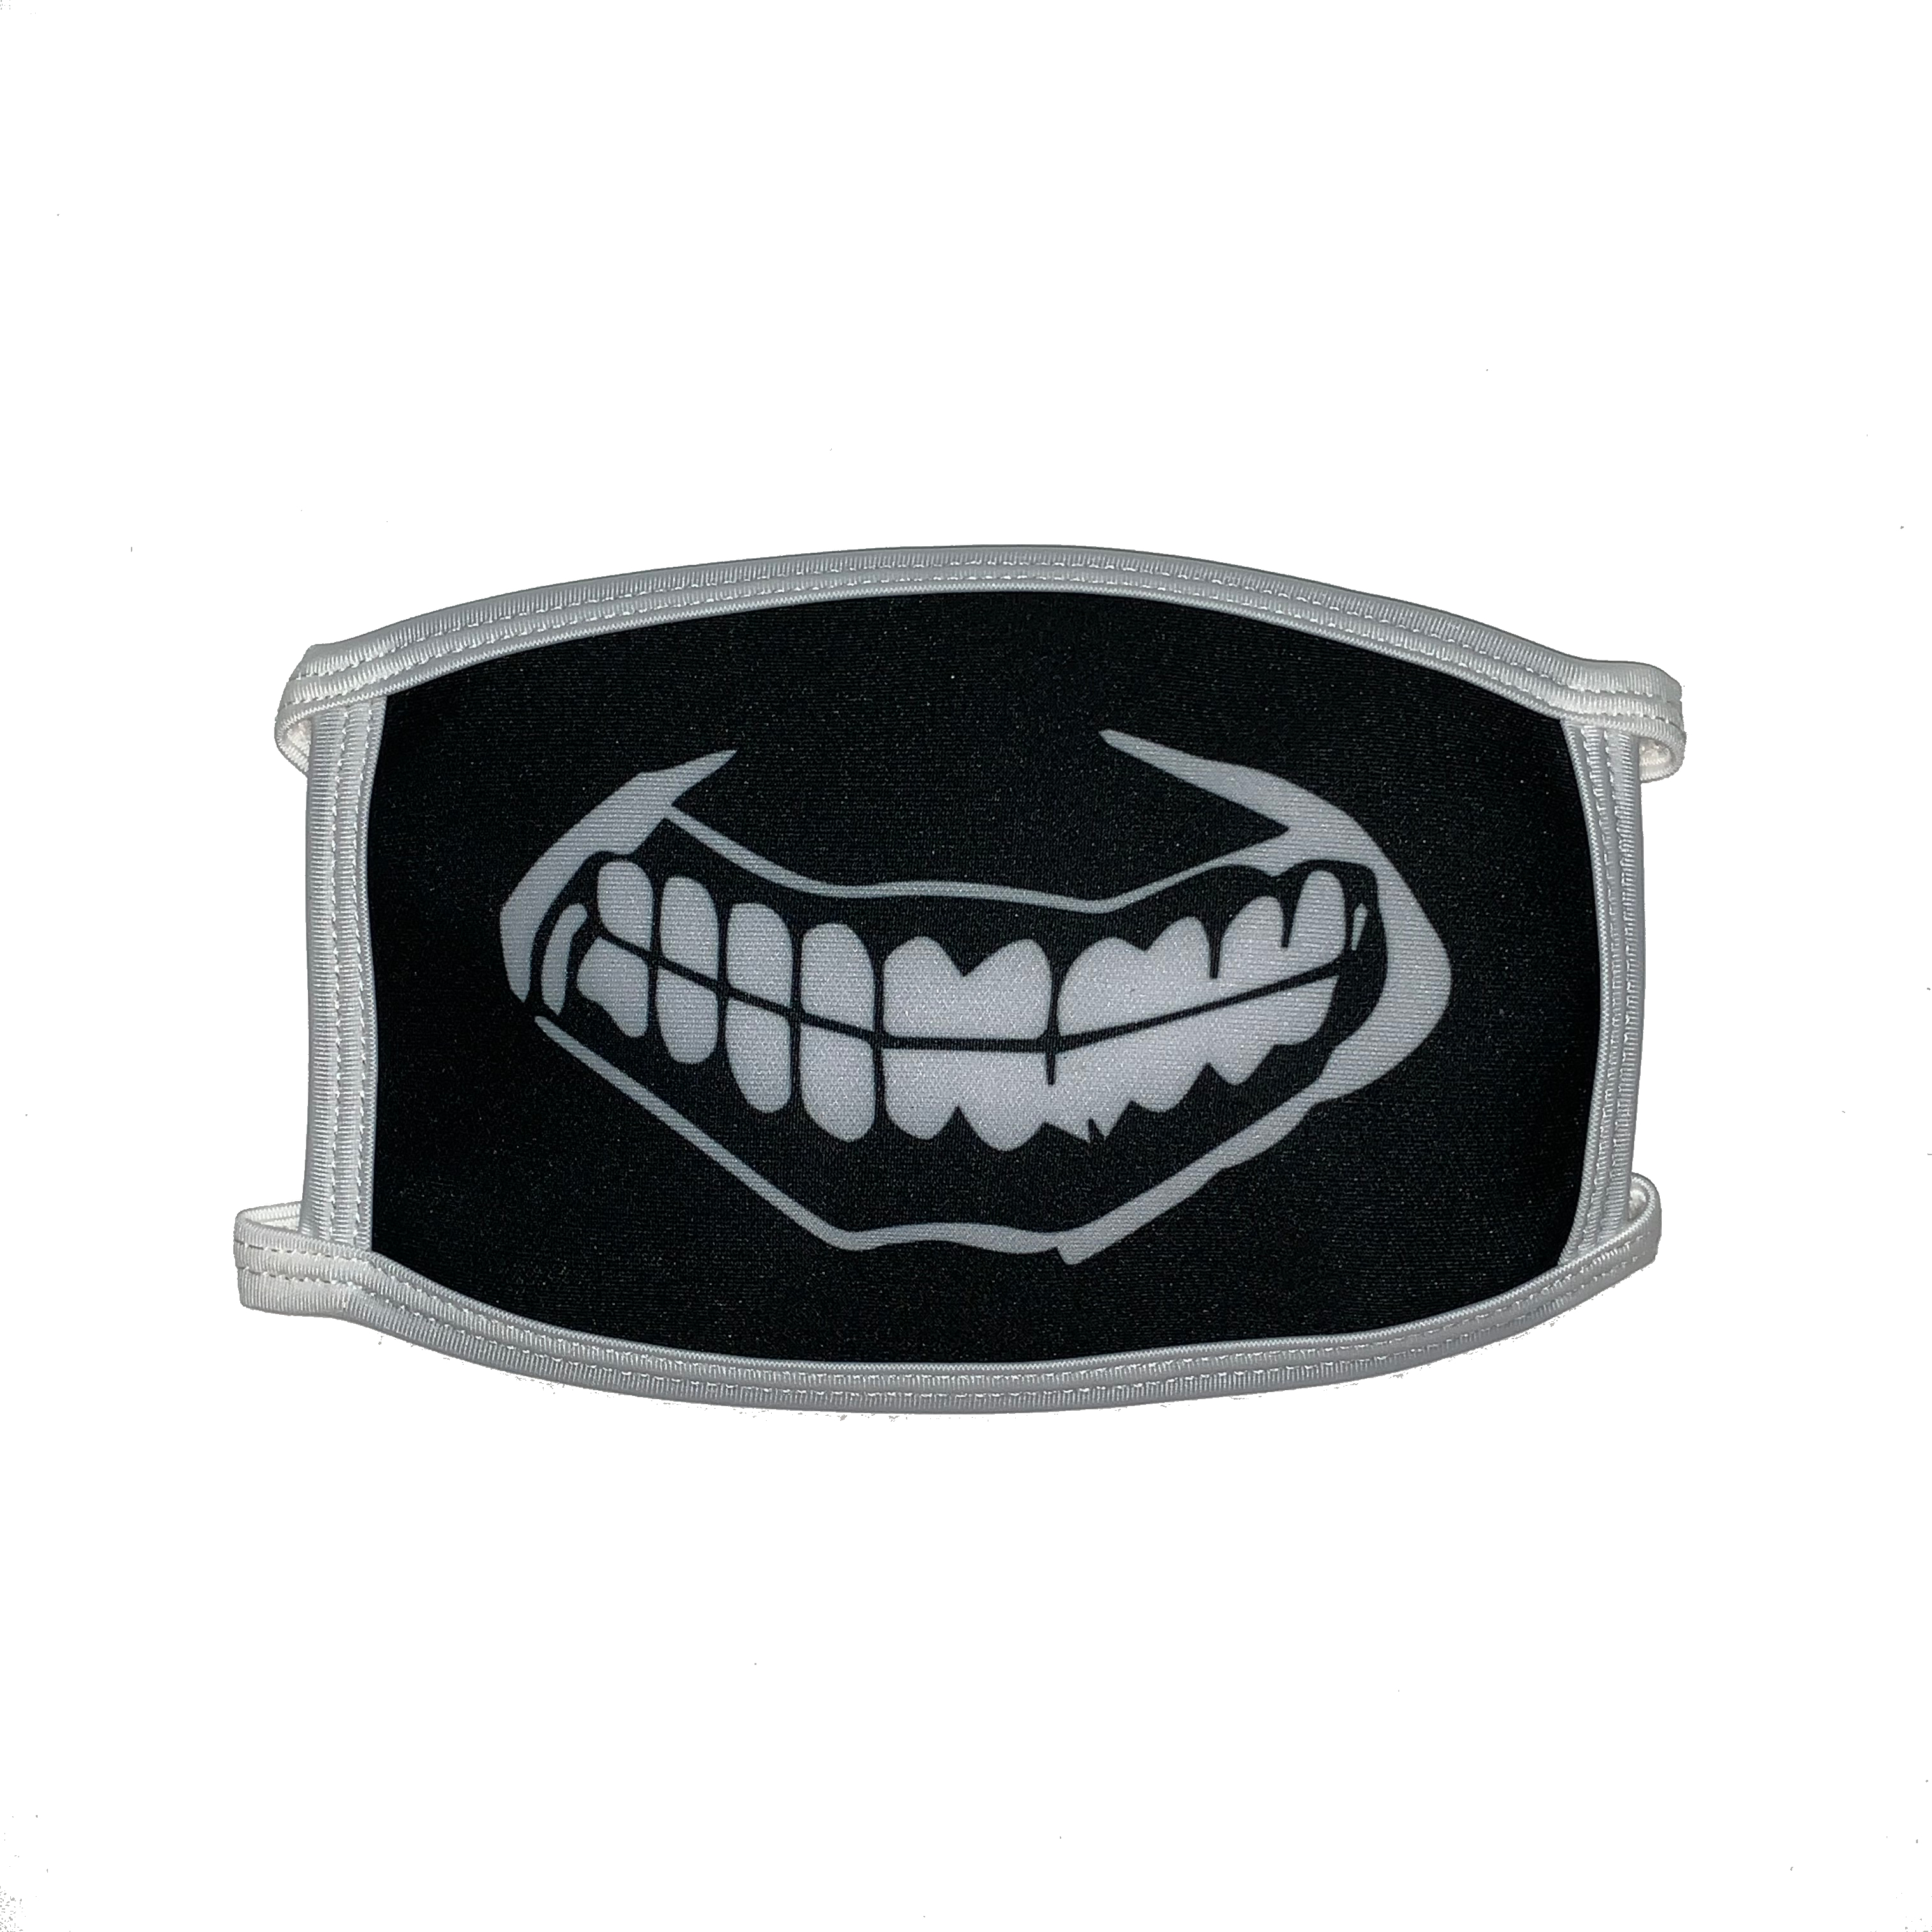 Cosplay Mask Anime Skull Teeth Smile Black One Size Fits Most